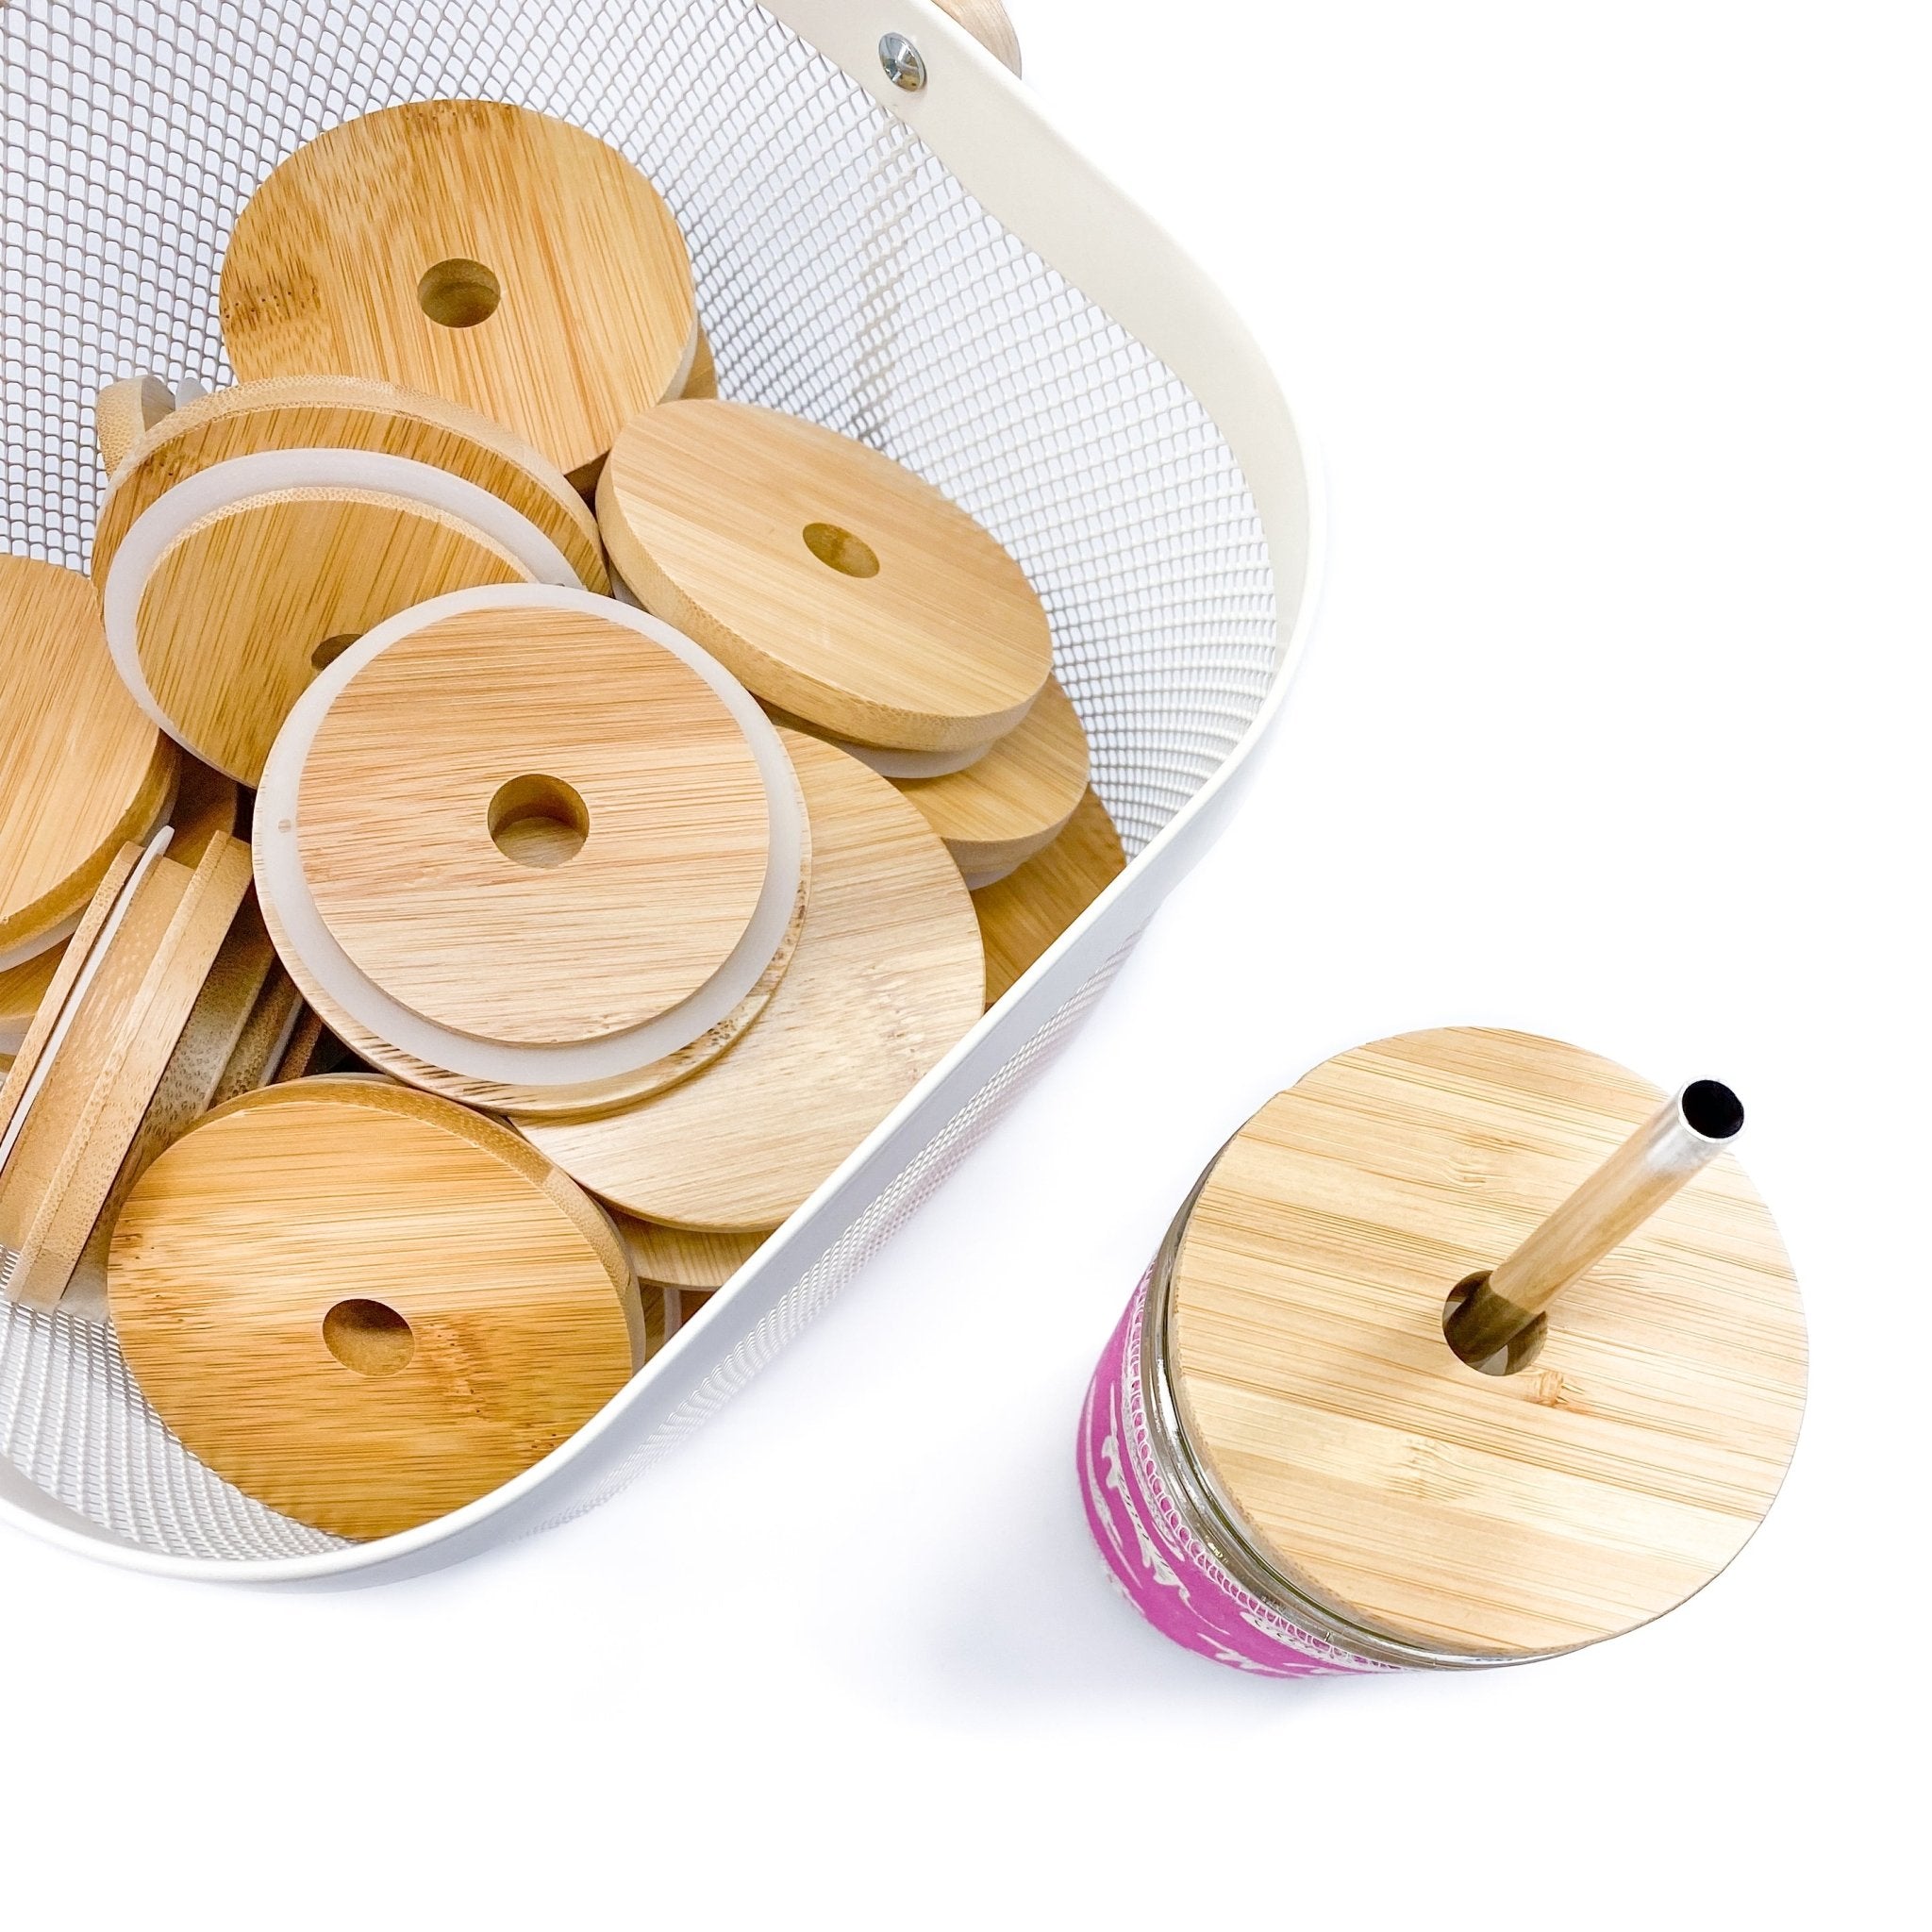 Bamboo Straw Hole Tumbler Lid Wide Mouth